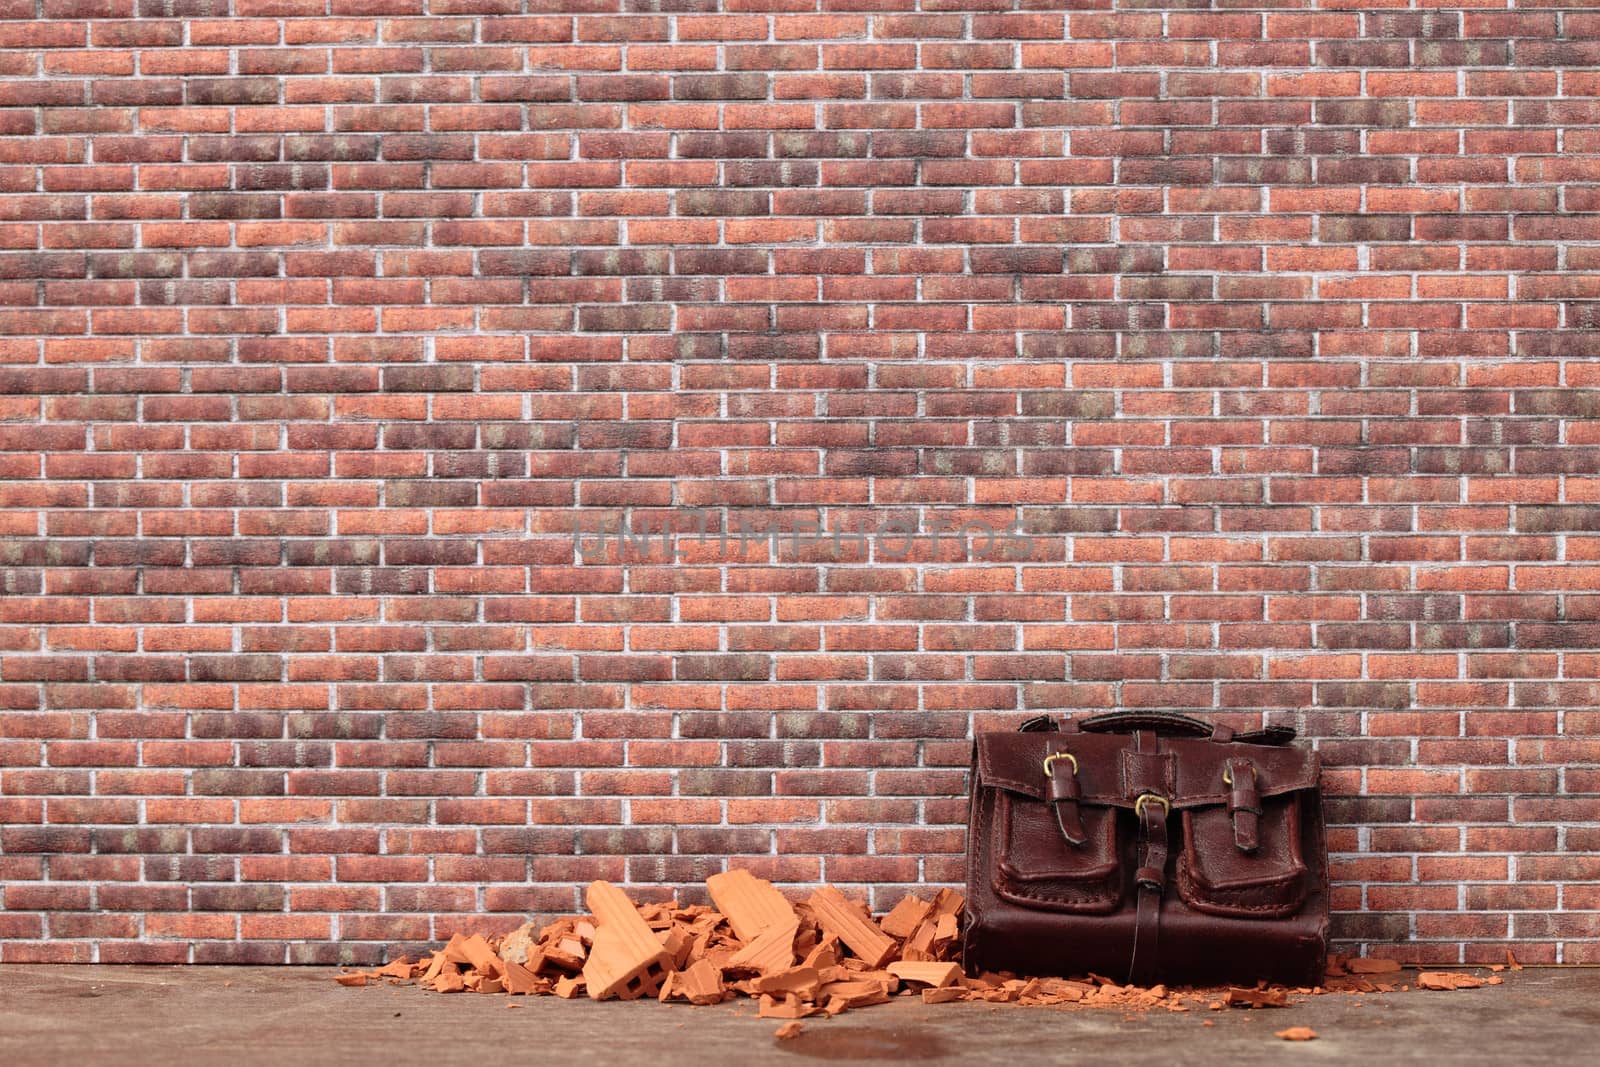 abandoned bag on a brick wall by erllre